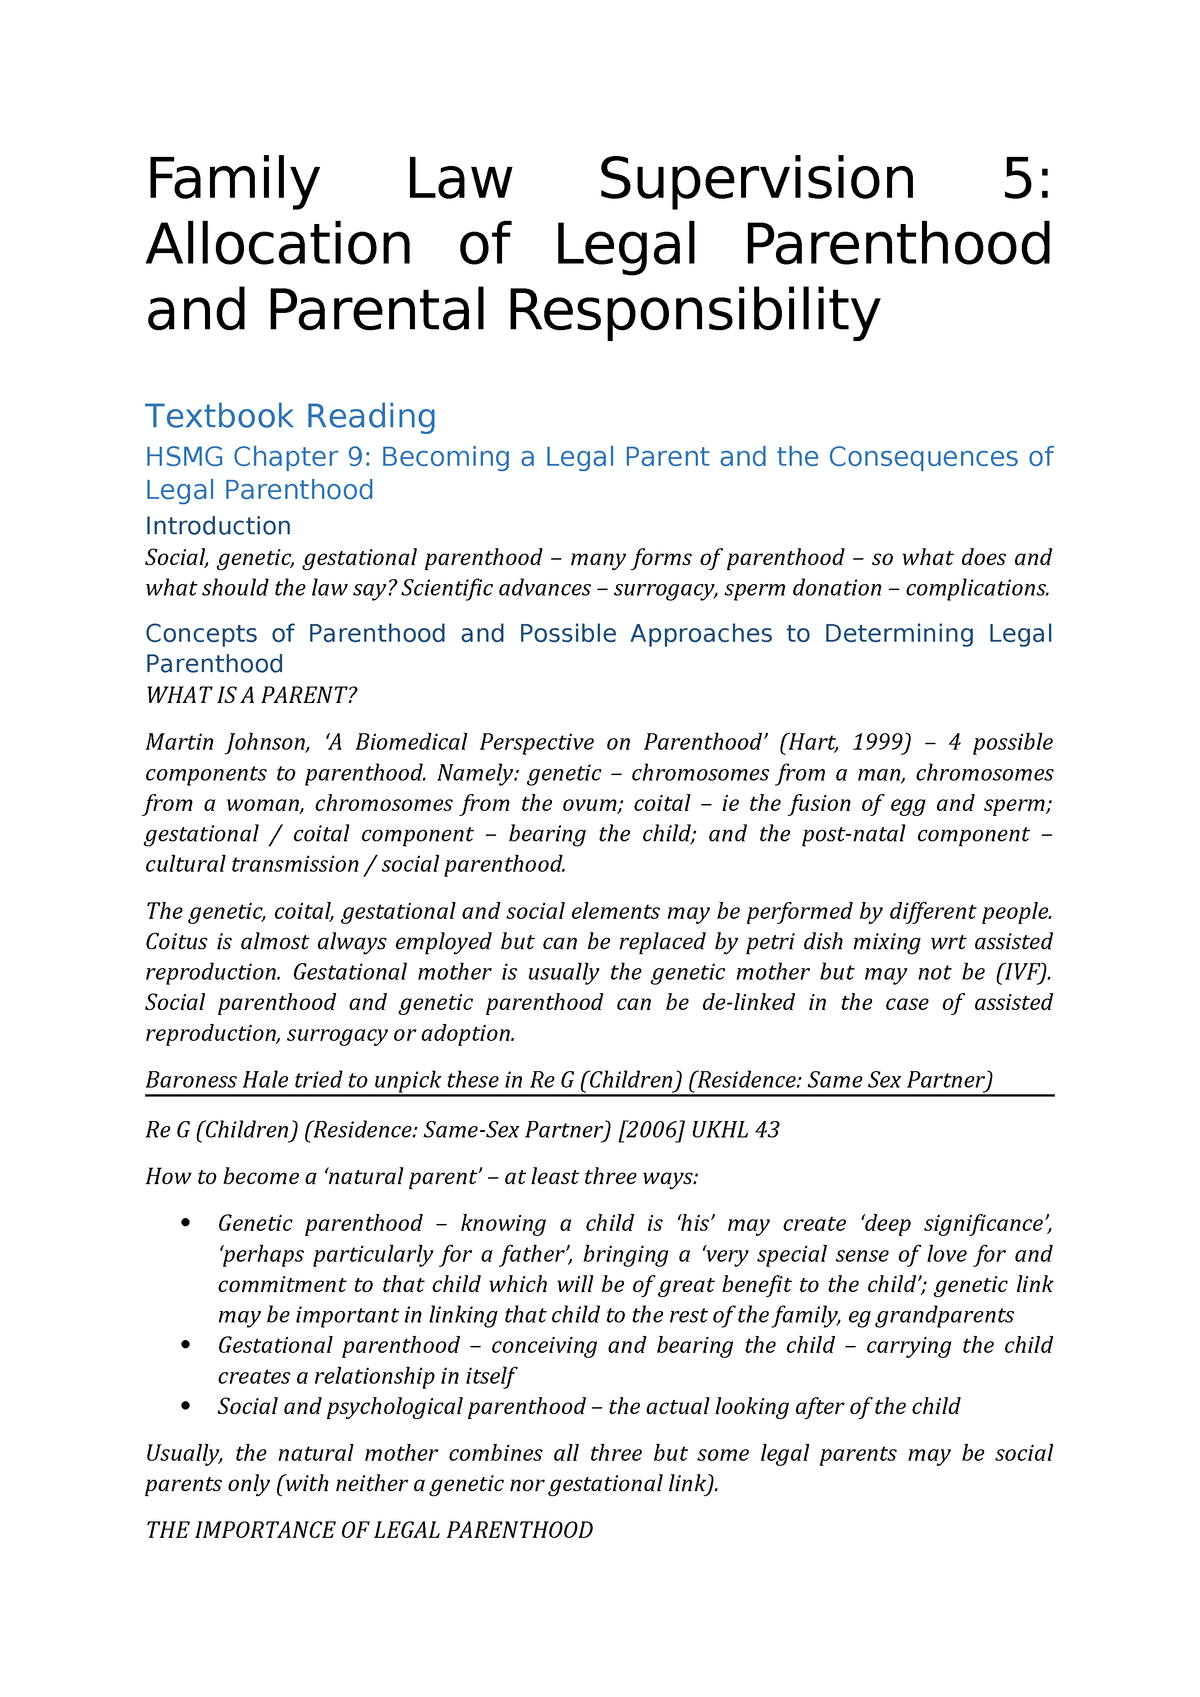 In The Absence Of A Partnership Agreement The Law Says Full Notes Fam Supervision 5 Legal Parenthood And Parental Studocu